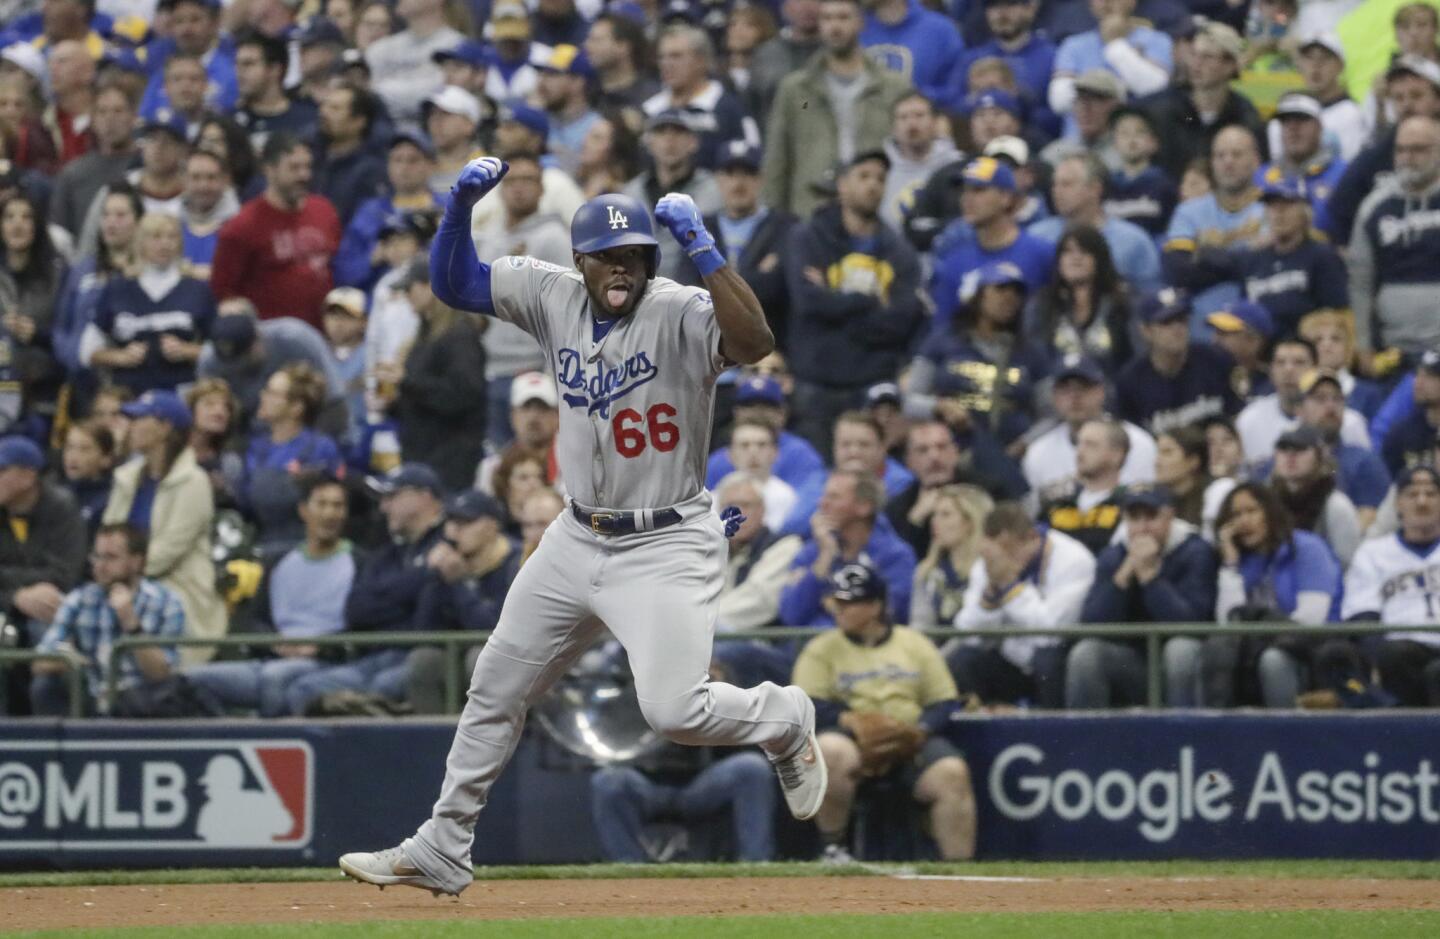 Yasiel Puig celebrates after hitting a three run homer in the sixth inning.